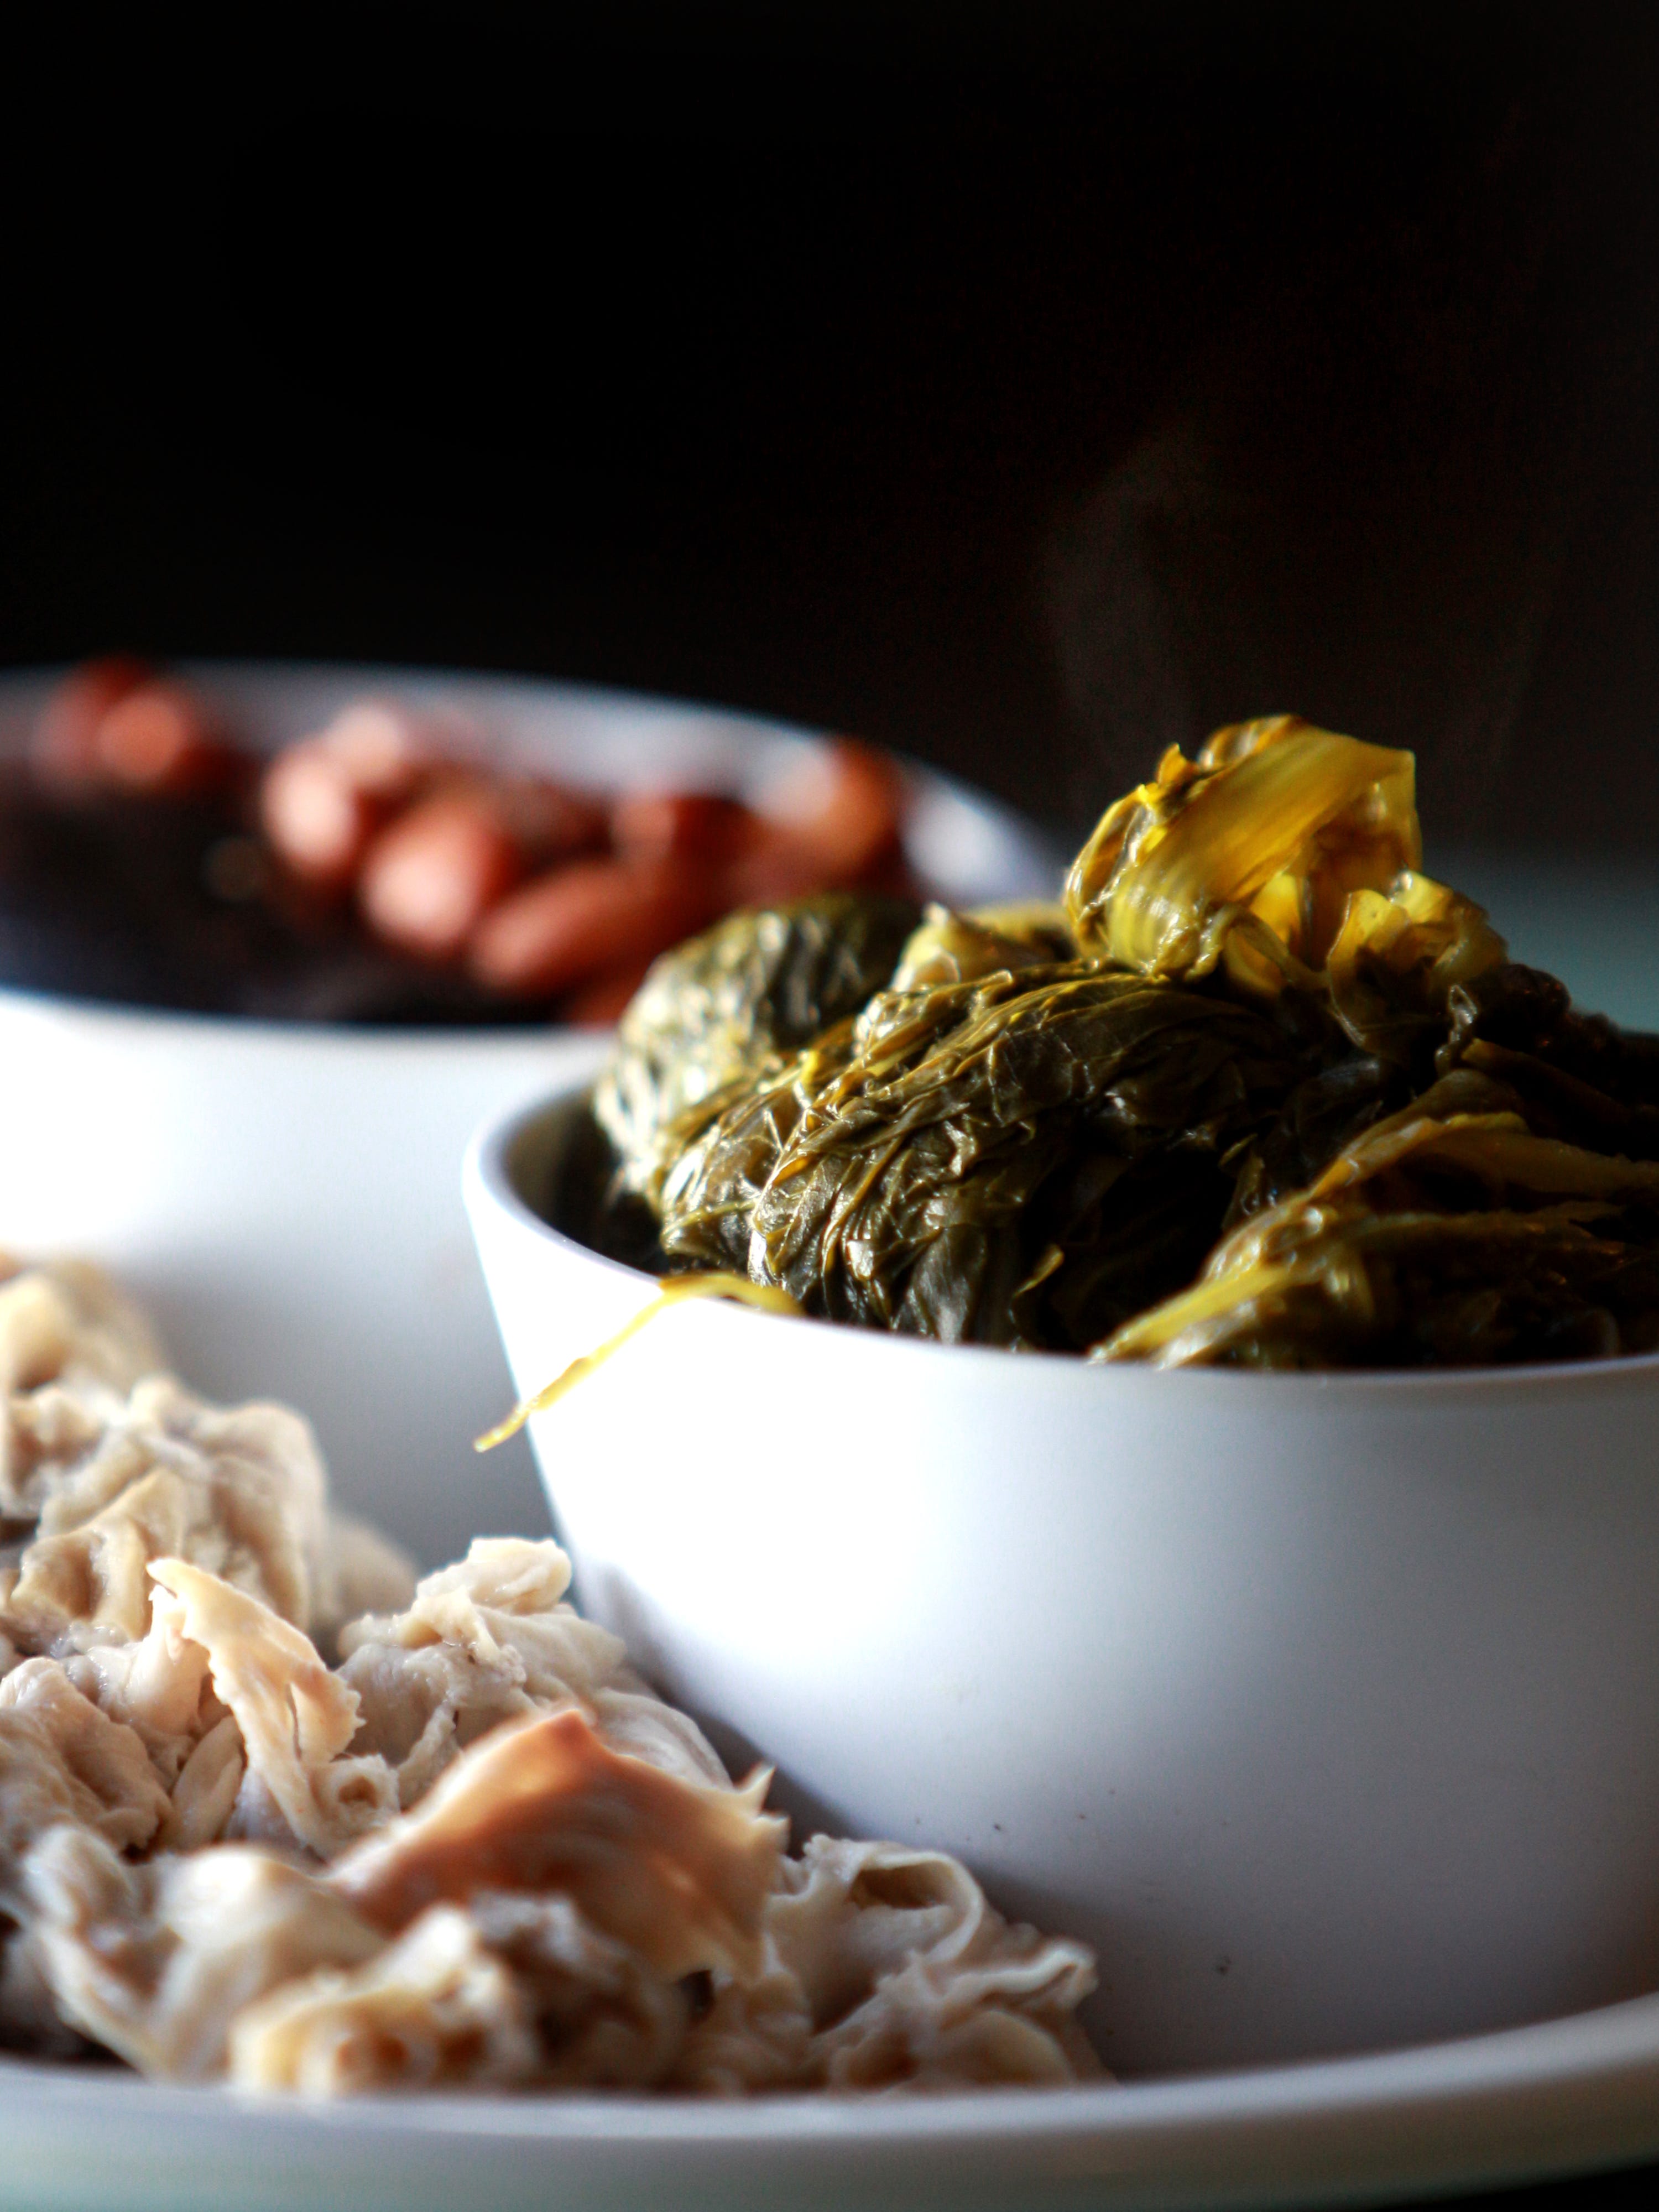 Steam rises from a bowl of greens served on a chili and beans dinner plate from the Orange Mound Grill.